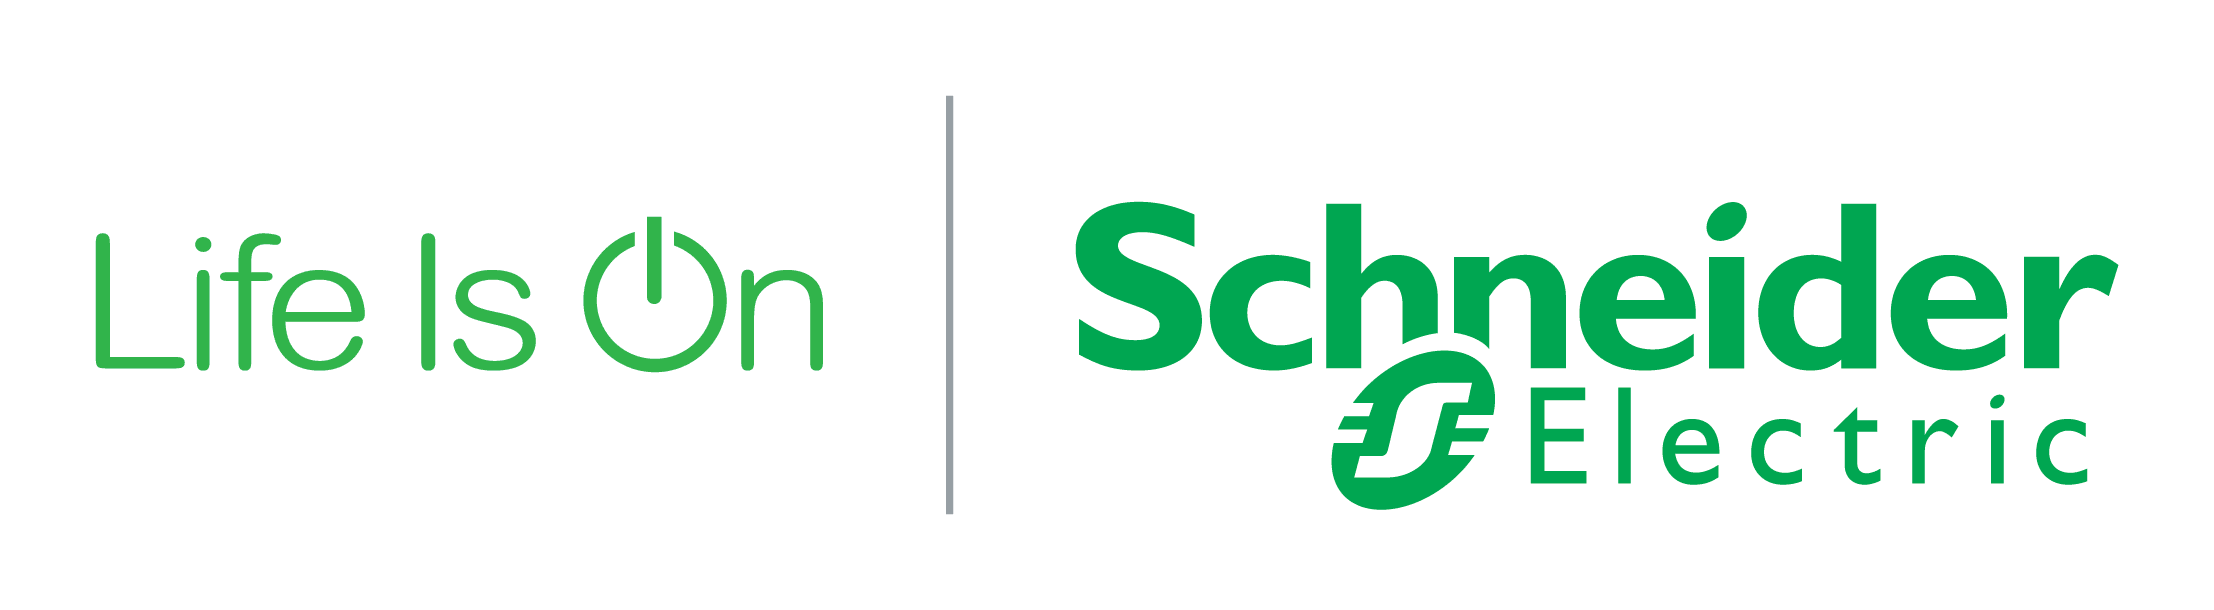 Life is on schneider electric logo.